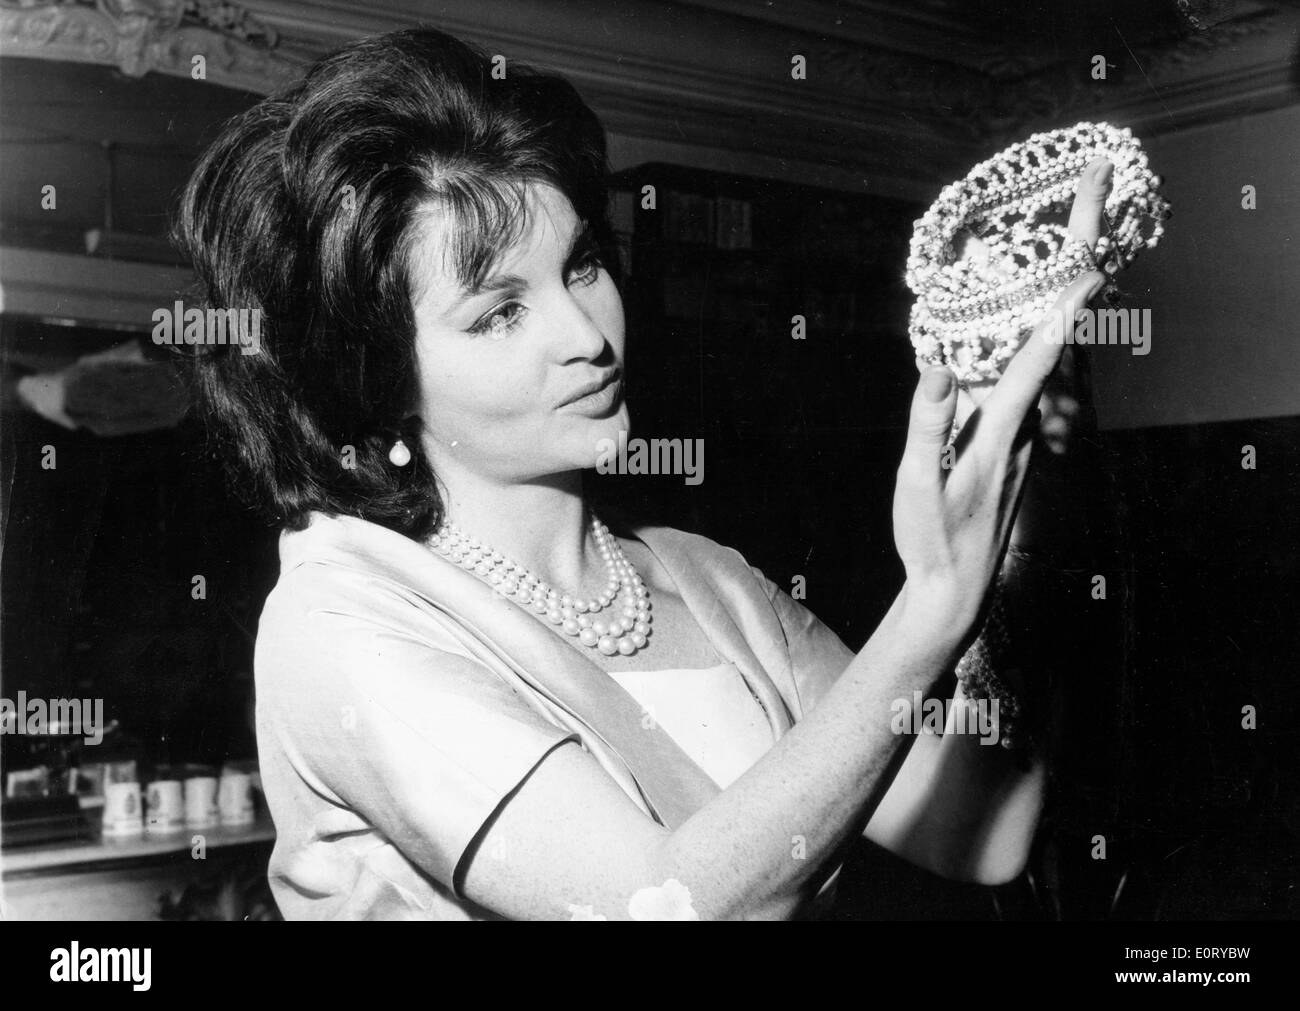 Actress Yvonne Furneaux admires pearl necklace Stock Photo